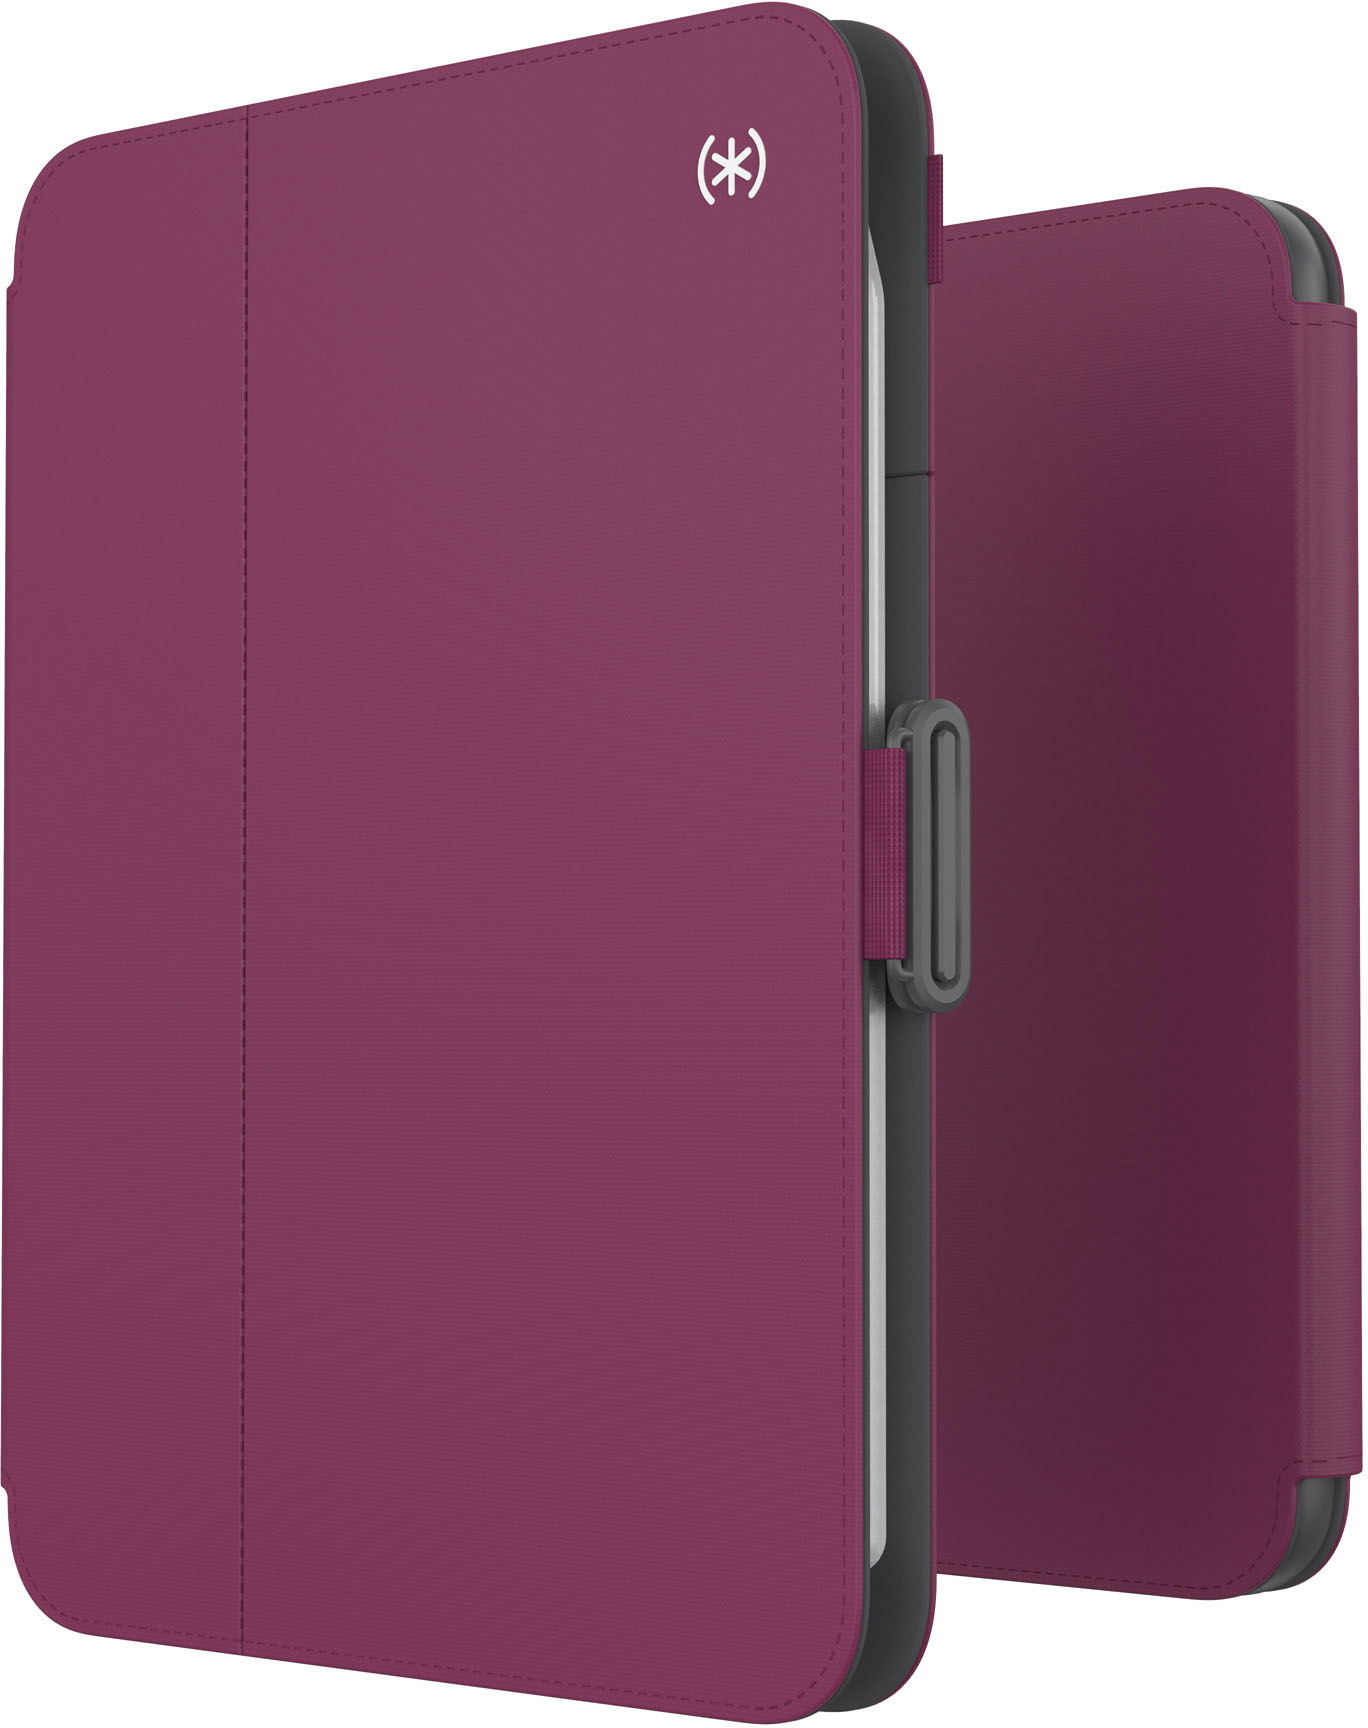 Speck Balance Folio Carrying Case, iPad mini (6th Gen), Very Berry Red